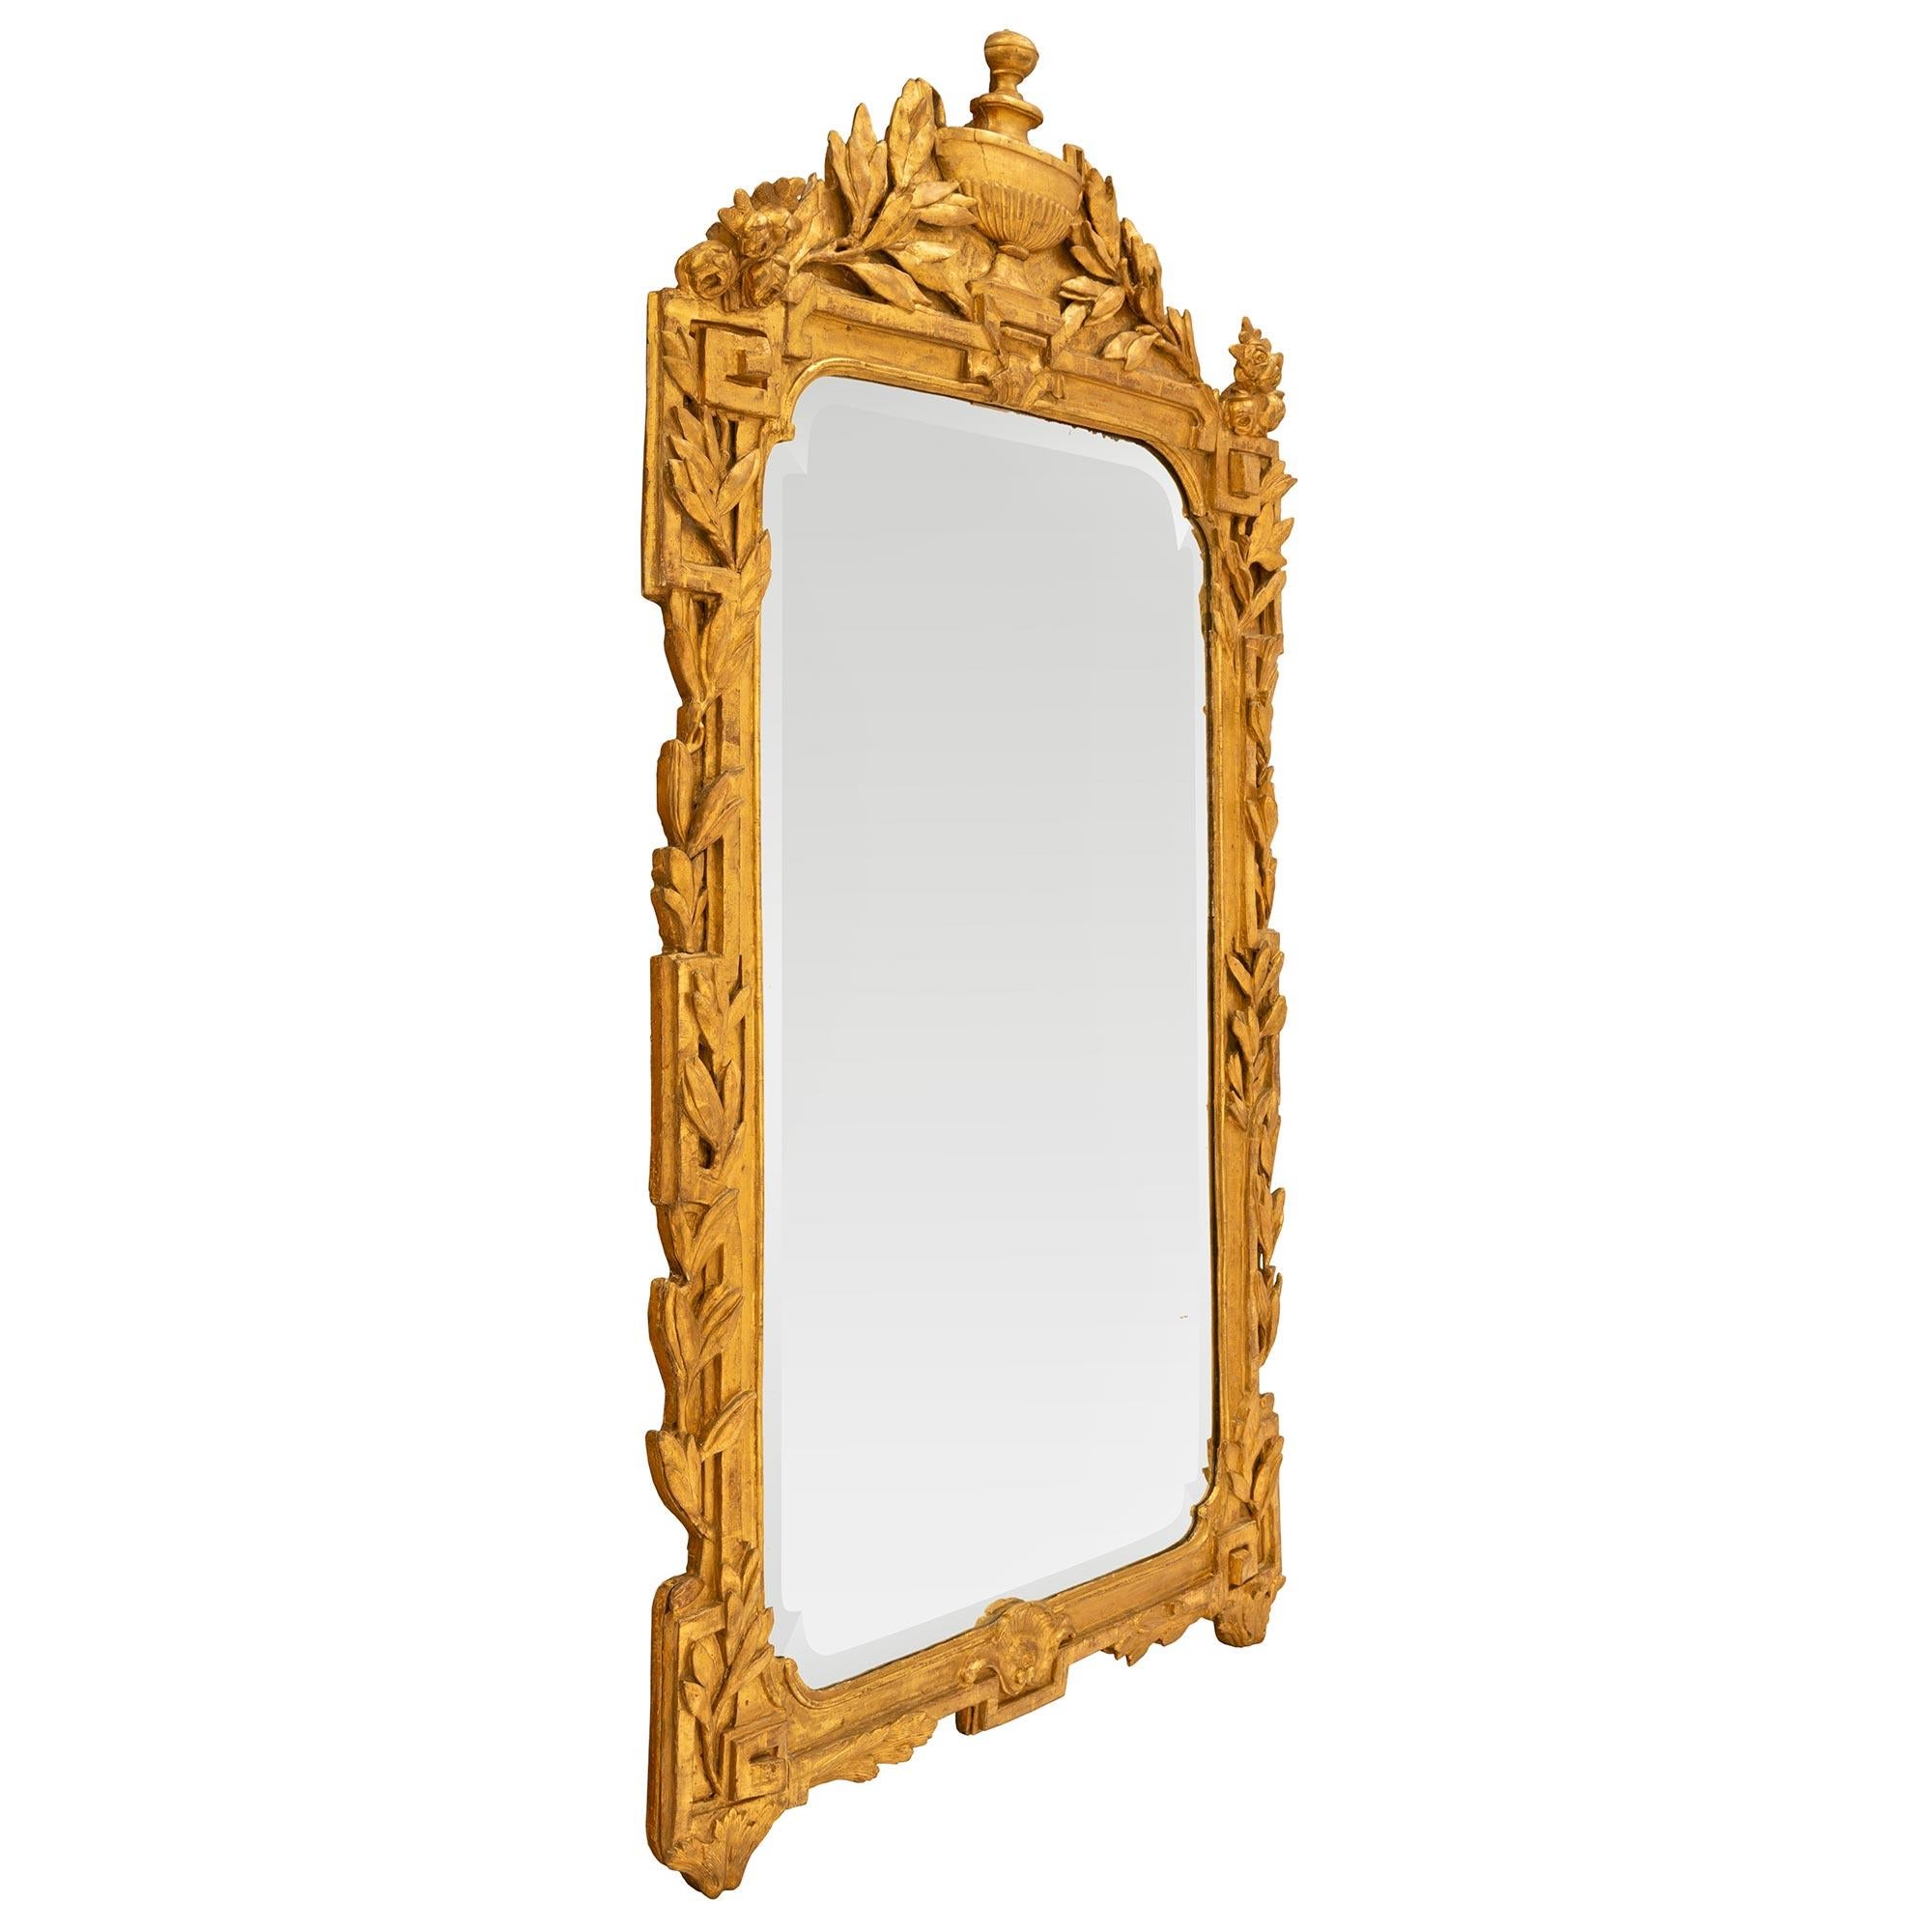 French 18th Century Provincial Regence Period Giltwood Mirror In Good Condition For Sale In West Palm Beach, FL